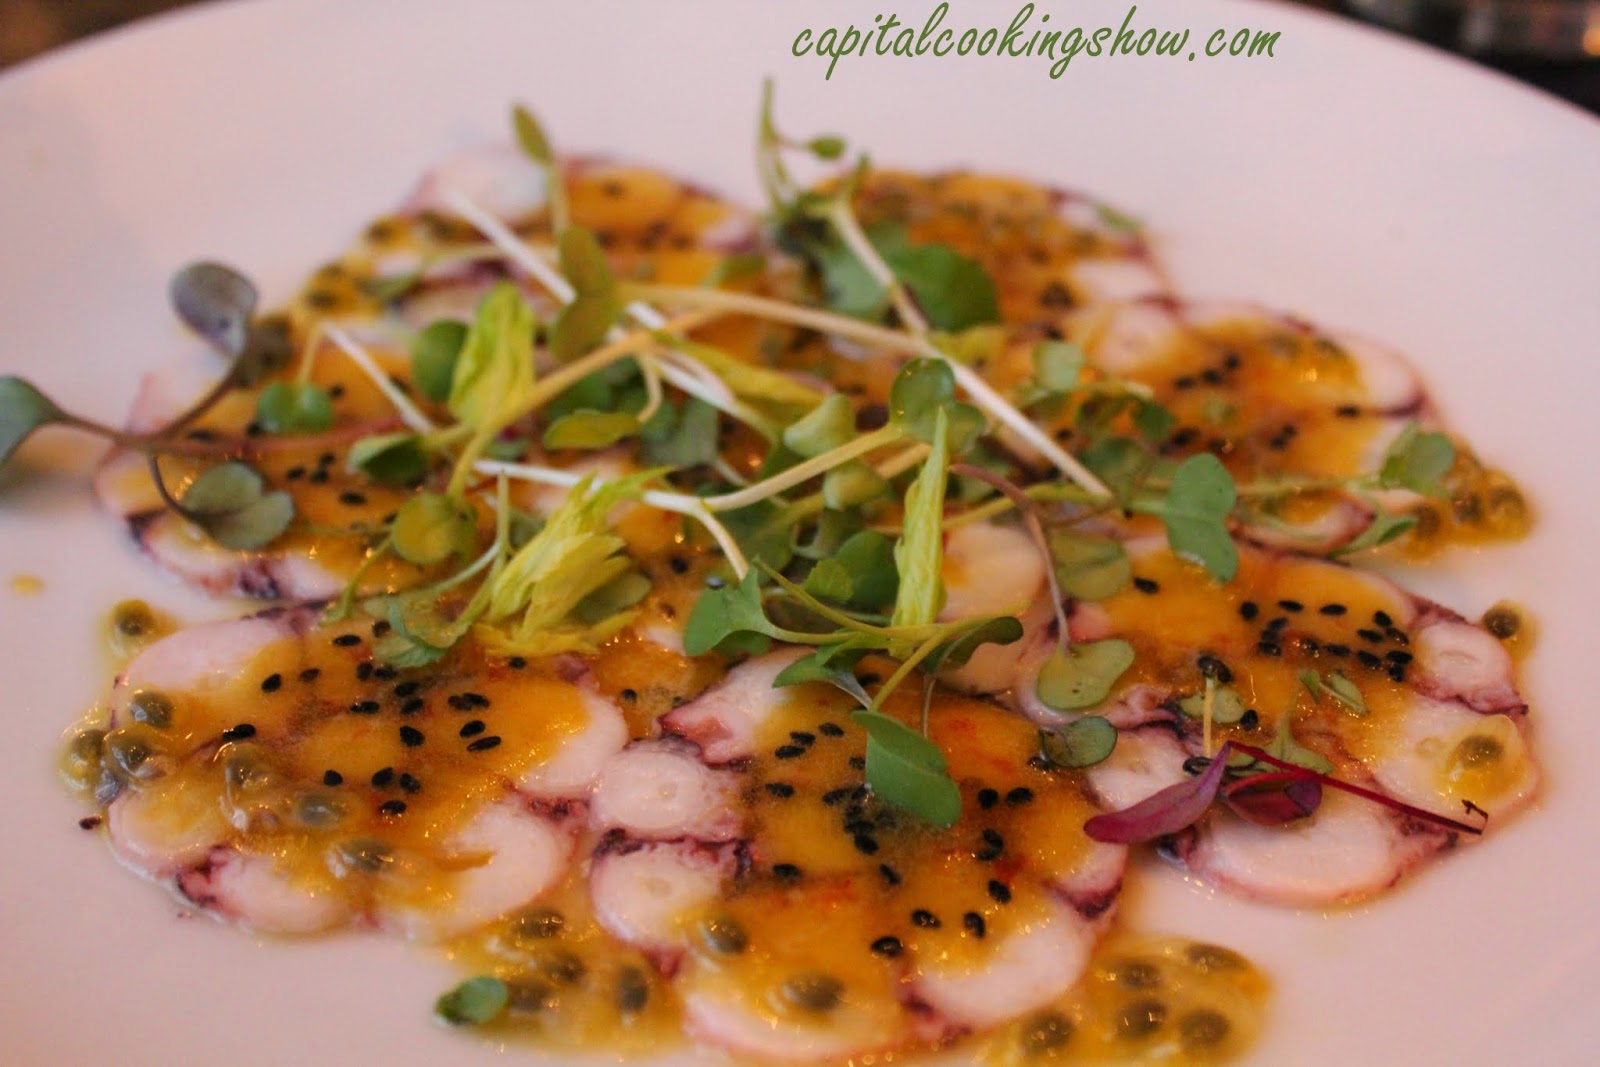 Capital Cooking with Lauren DeSantis: Eat With Your Eyes: Octopus Carpaccio